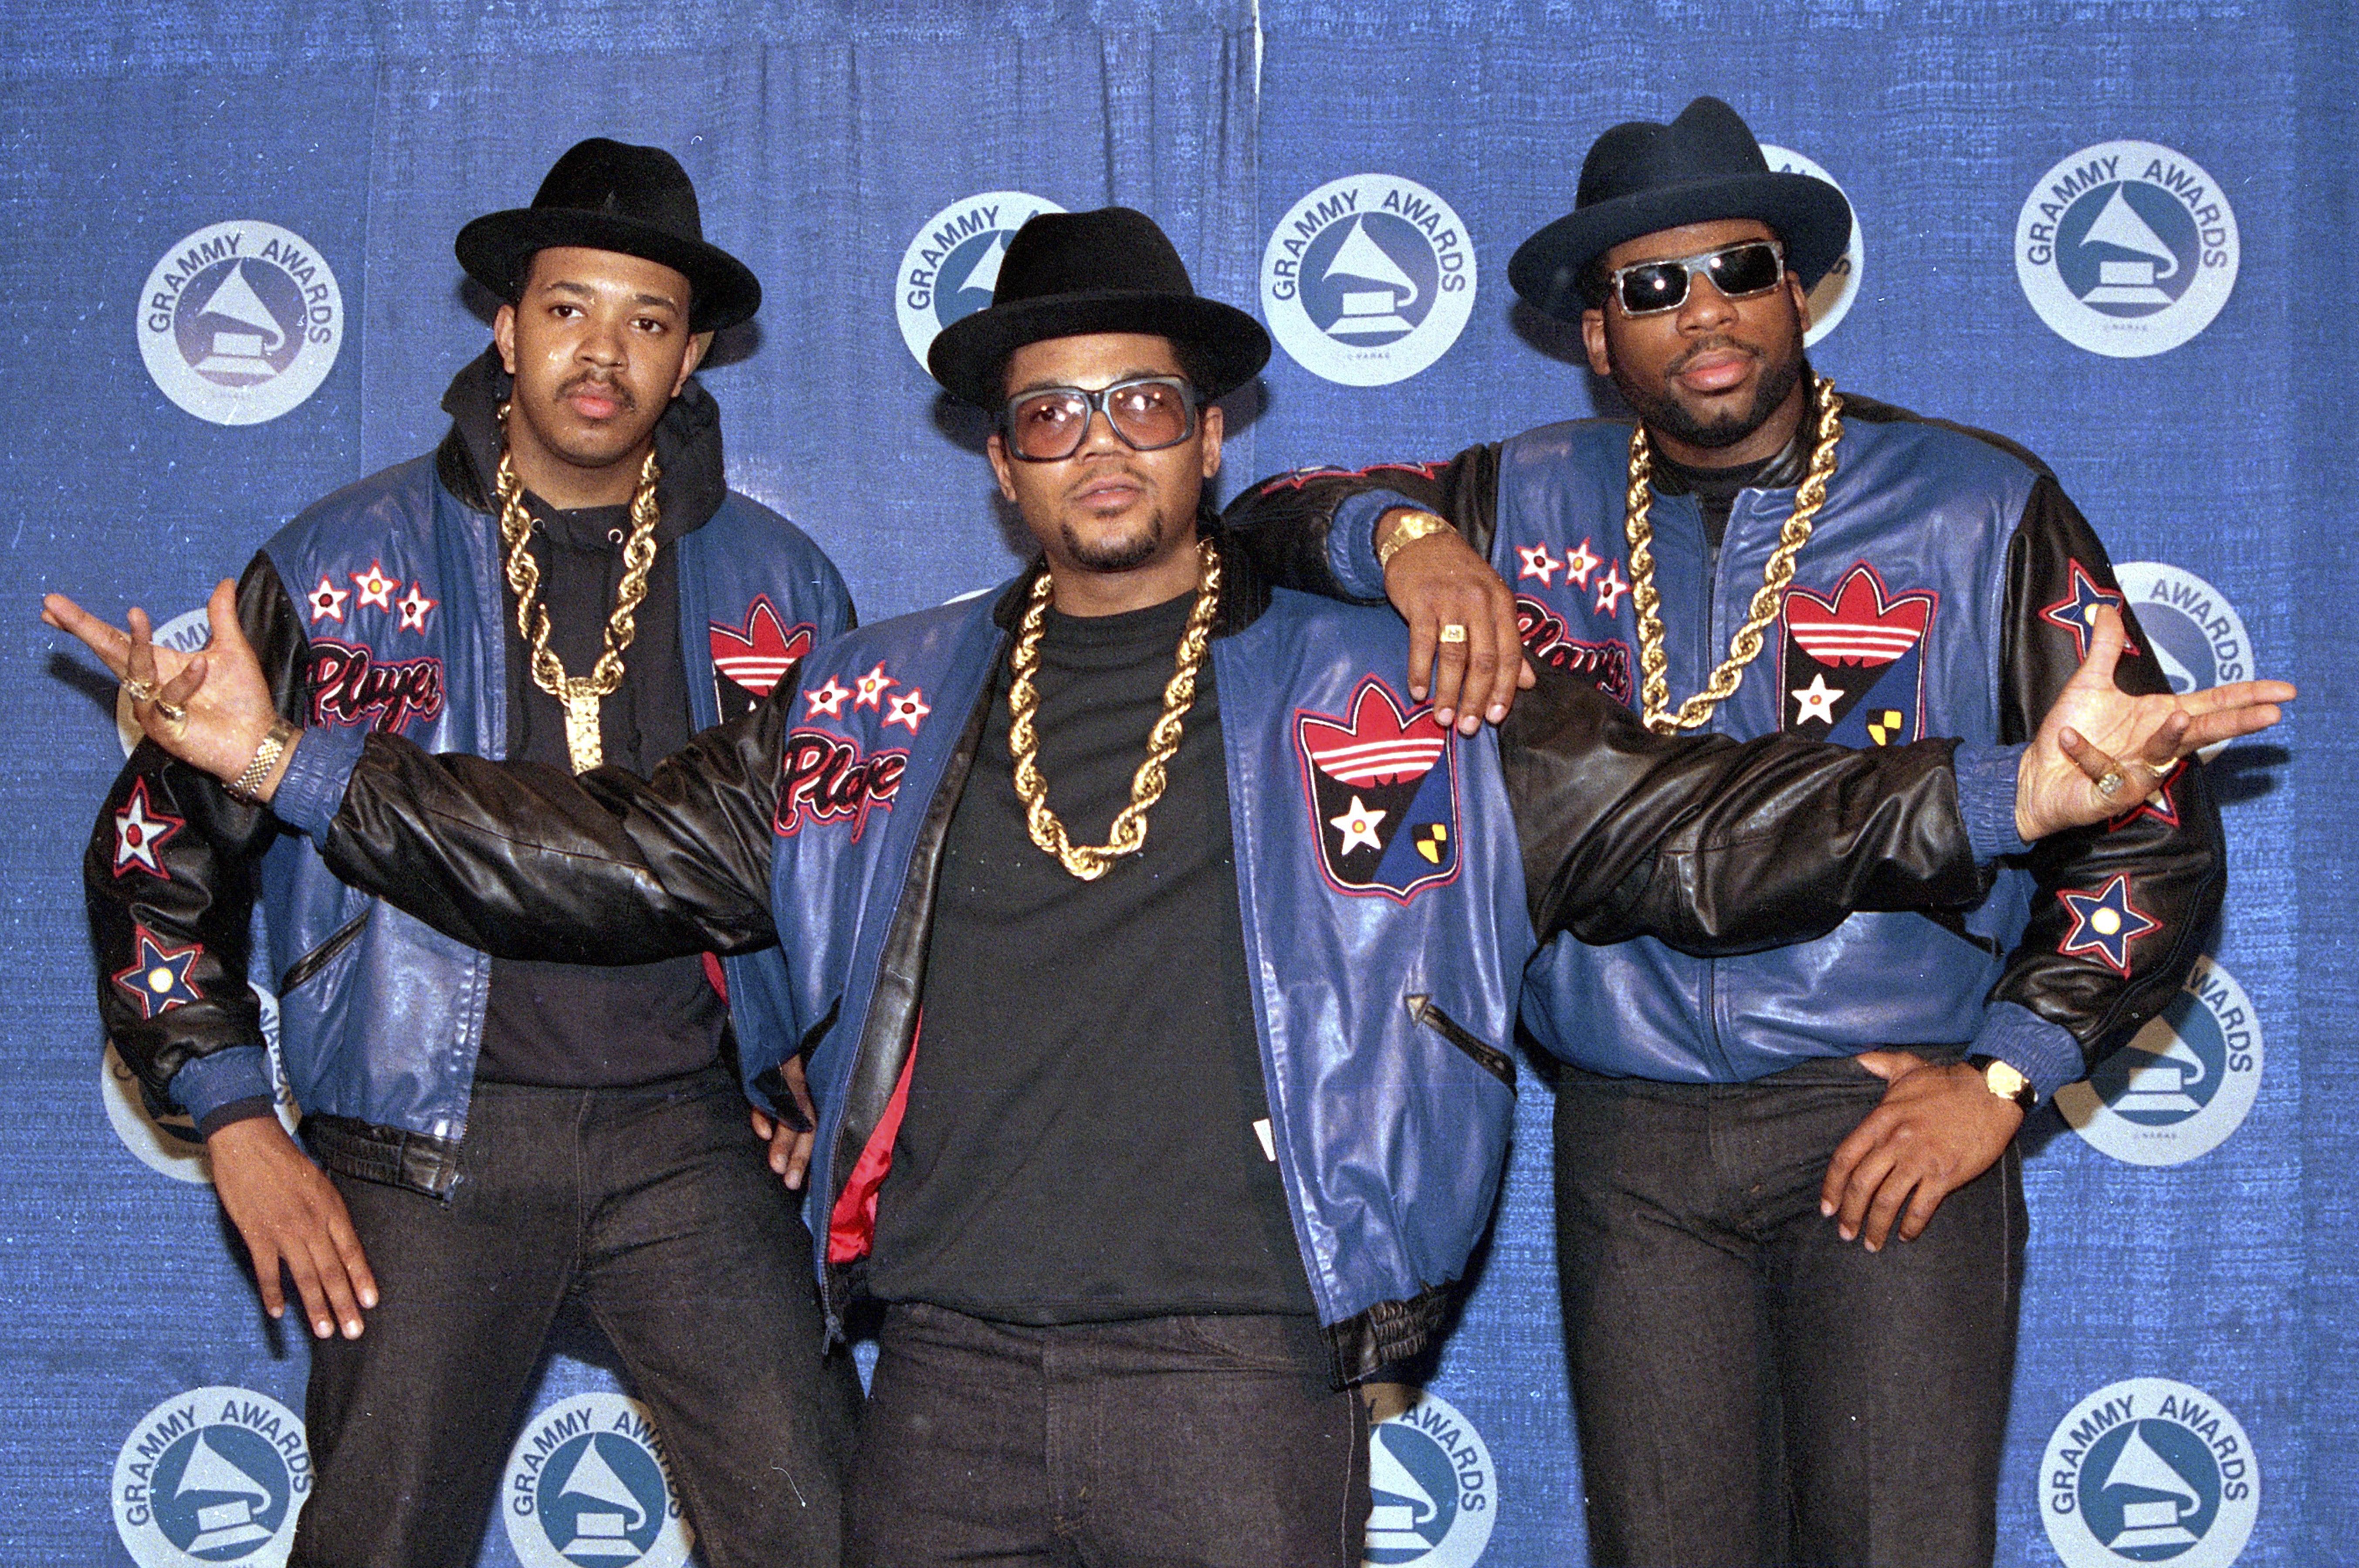 Run-DMC rapper 'relieved' feds charged suspects over